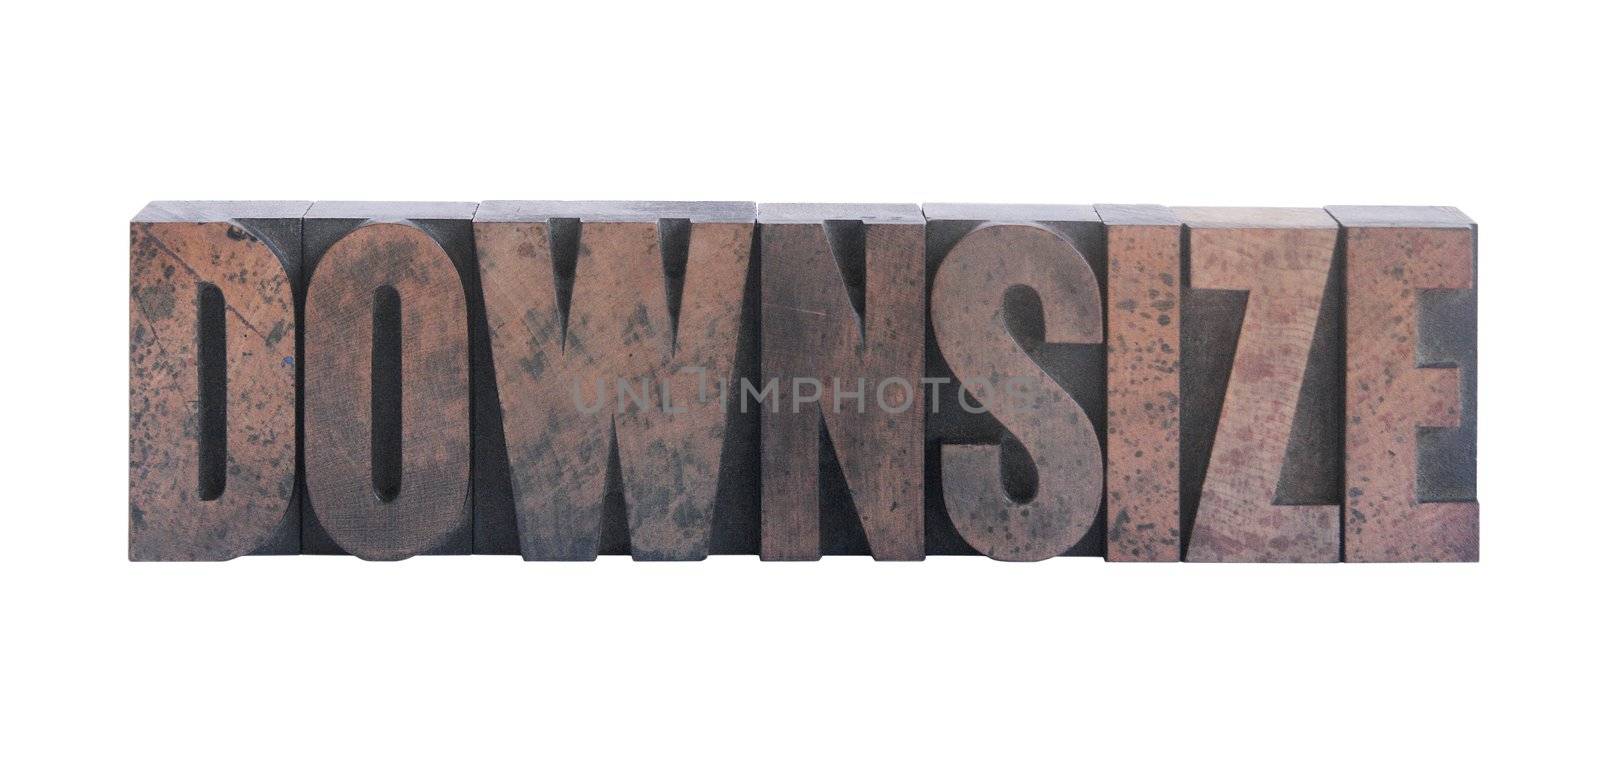 the word 'downsize' in old ink-stained wood type